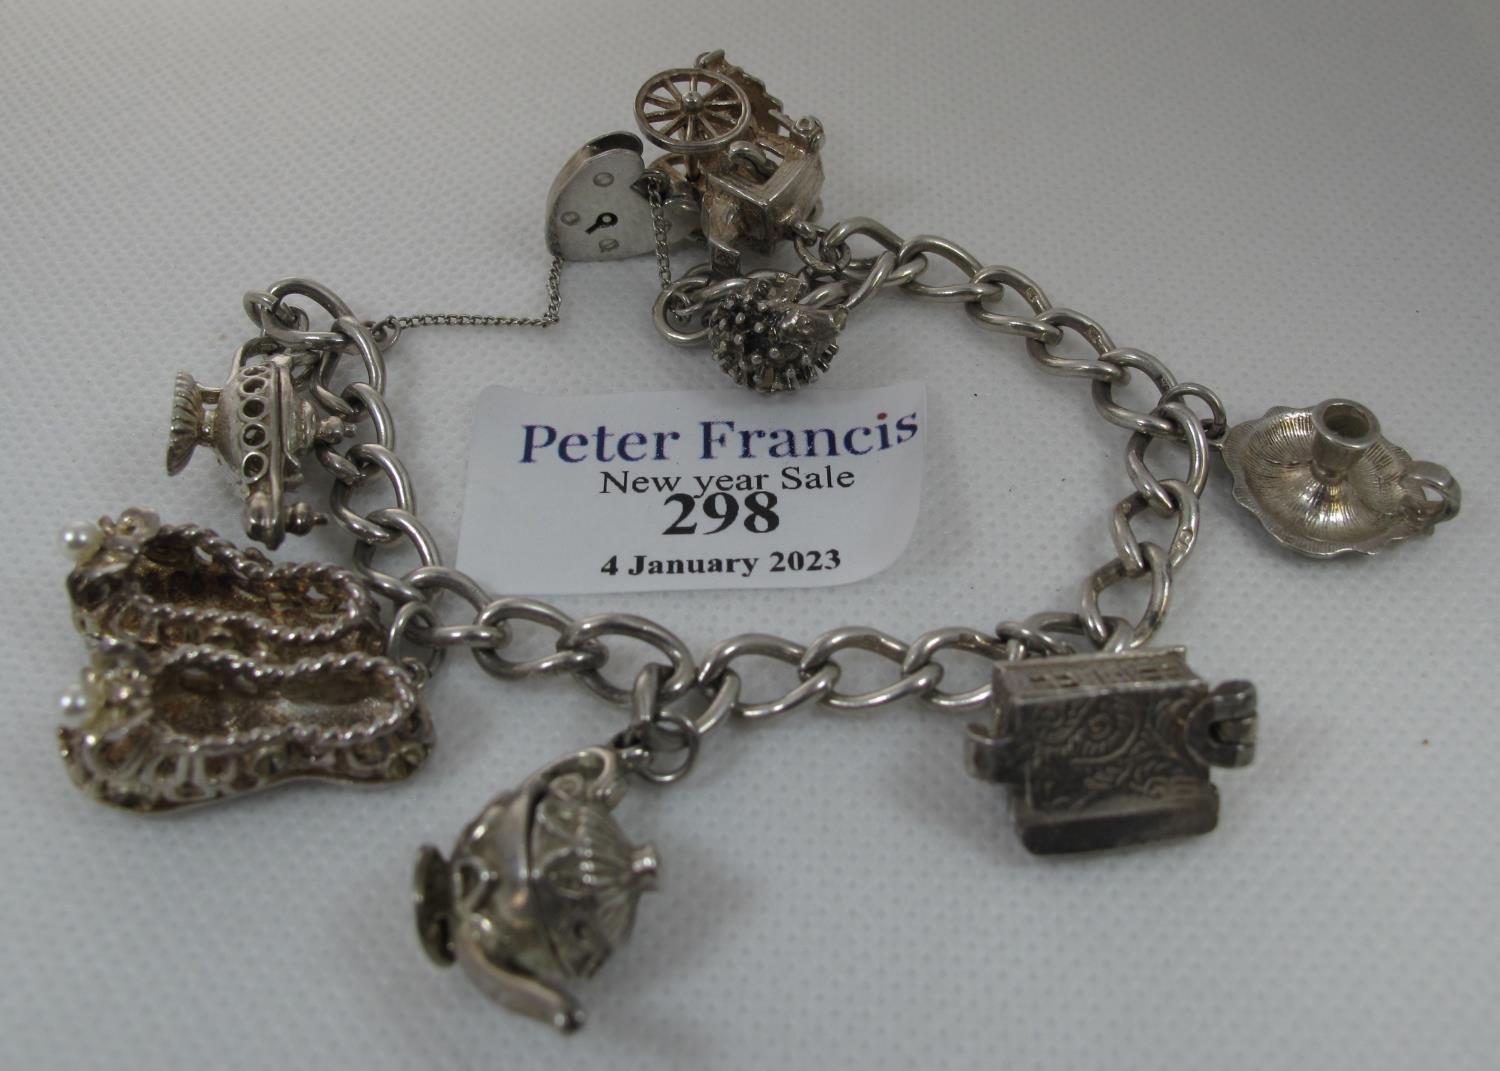 A silver charm bracelet with various charms including a hedgehog, lamp, pair of slippers etc. (B.